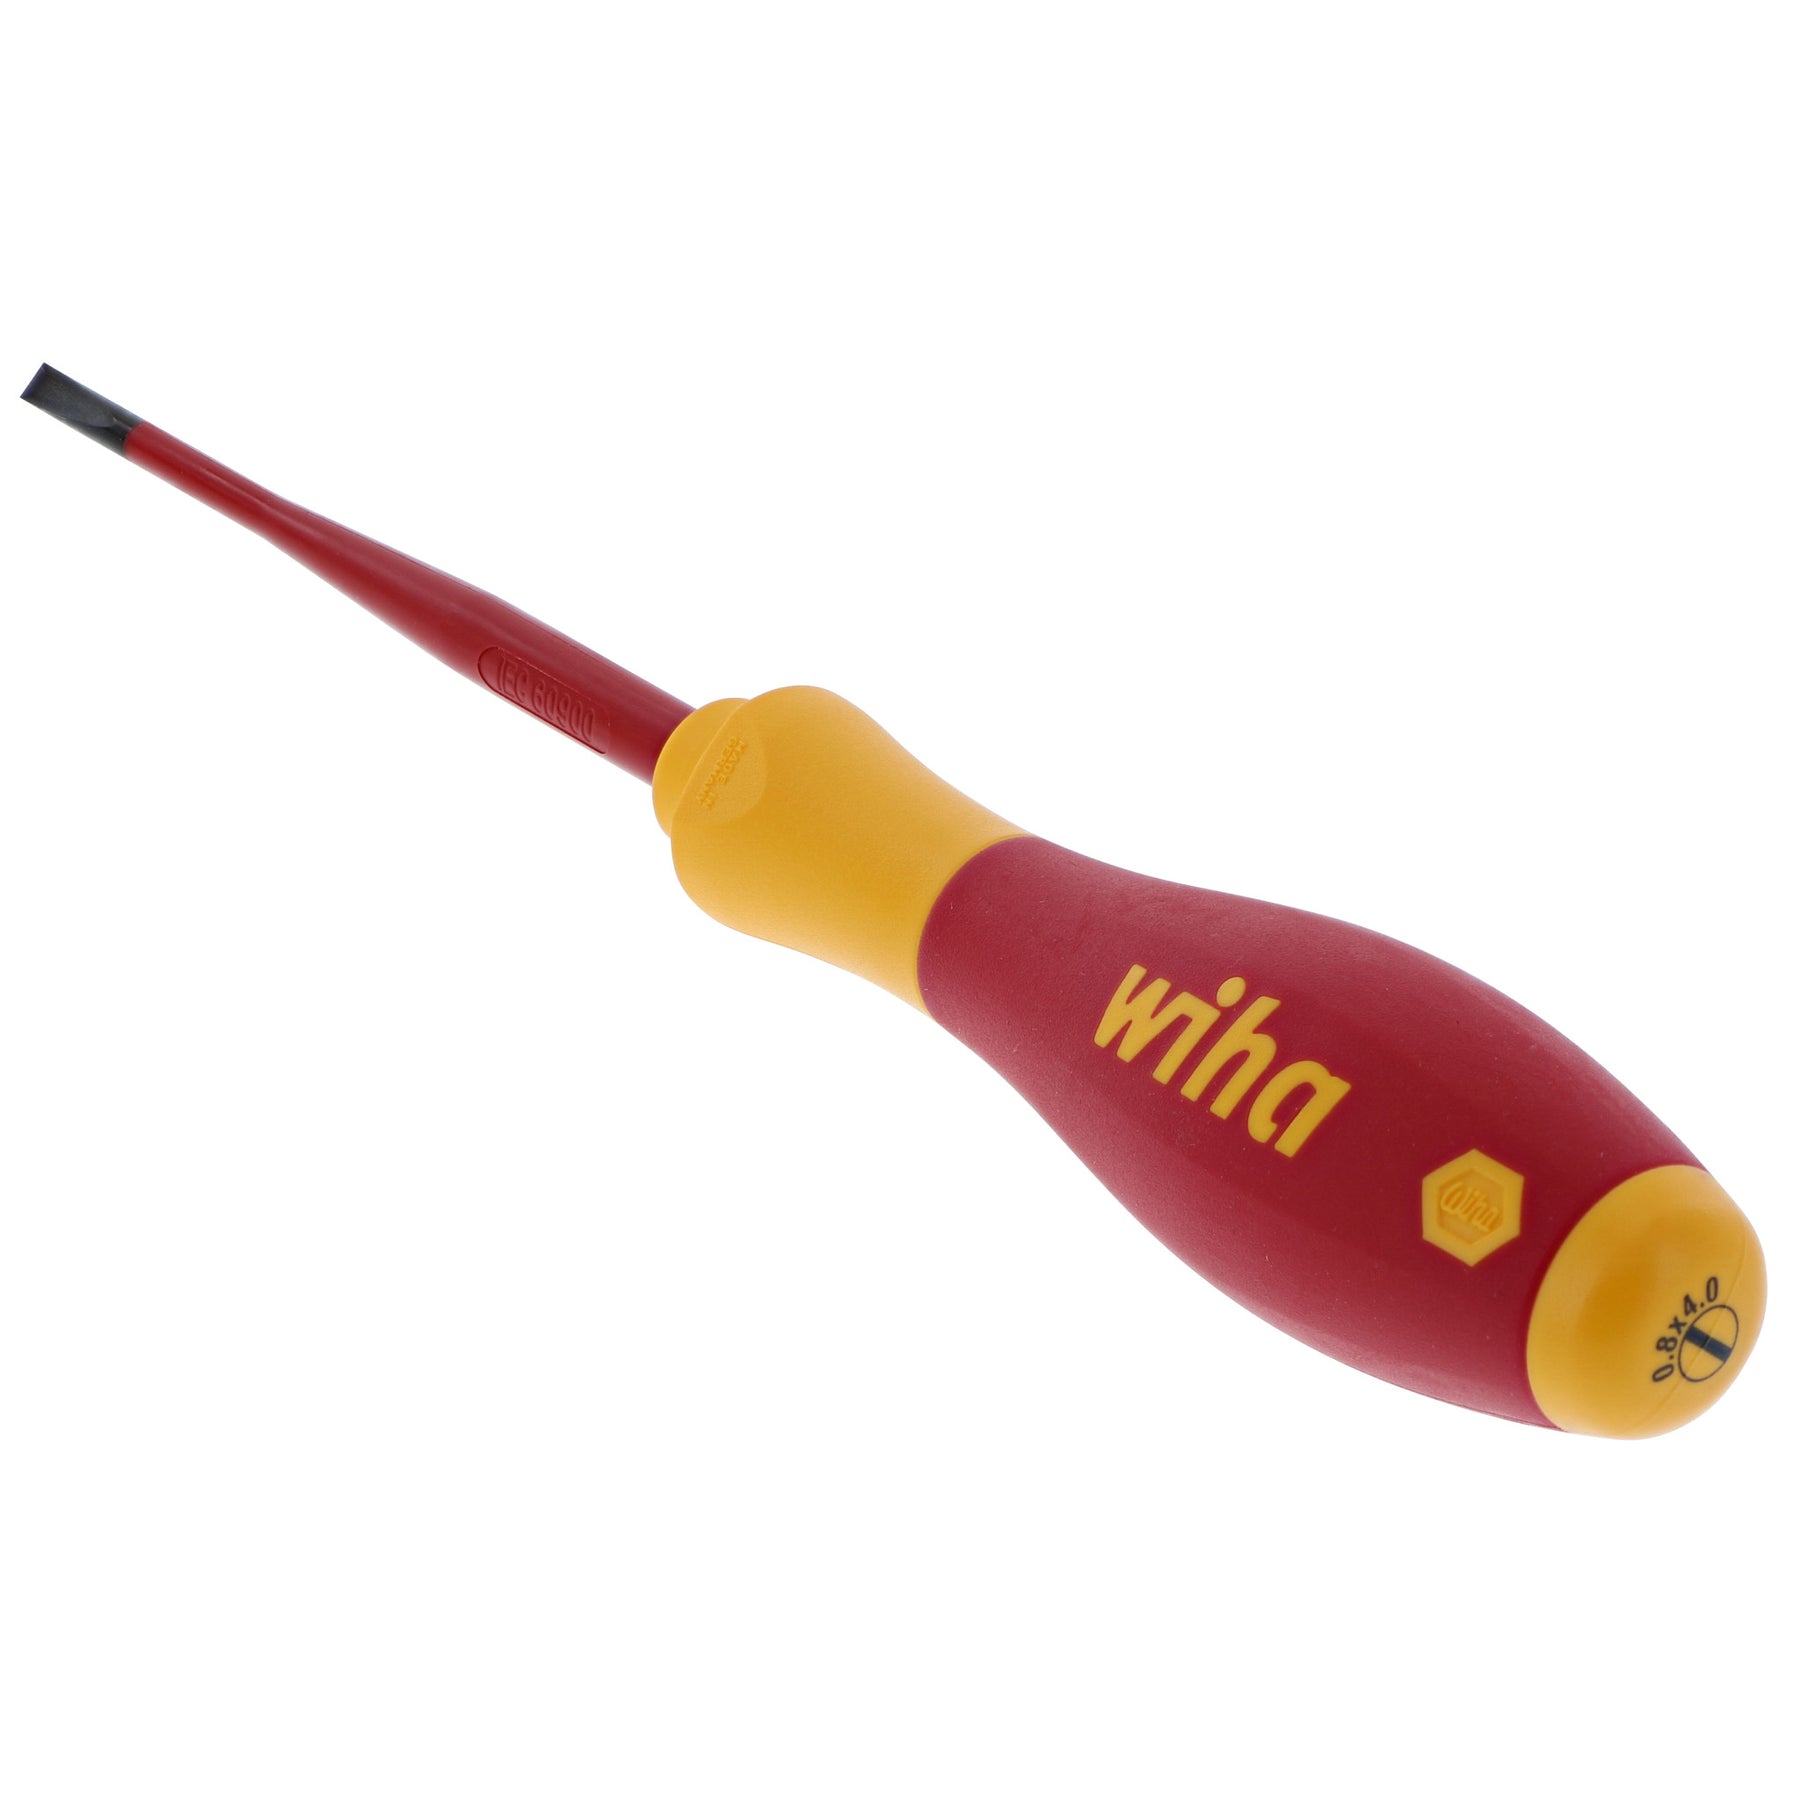 Insulated SlimLine Slotted Screwdriver 4.0mm x 100mm